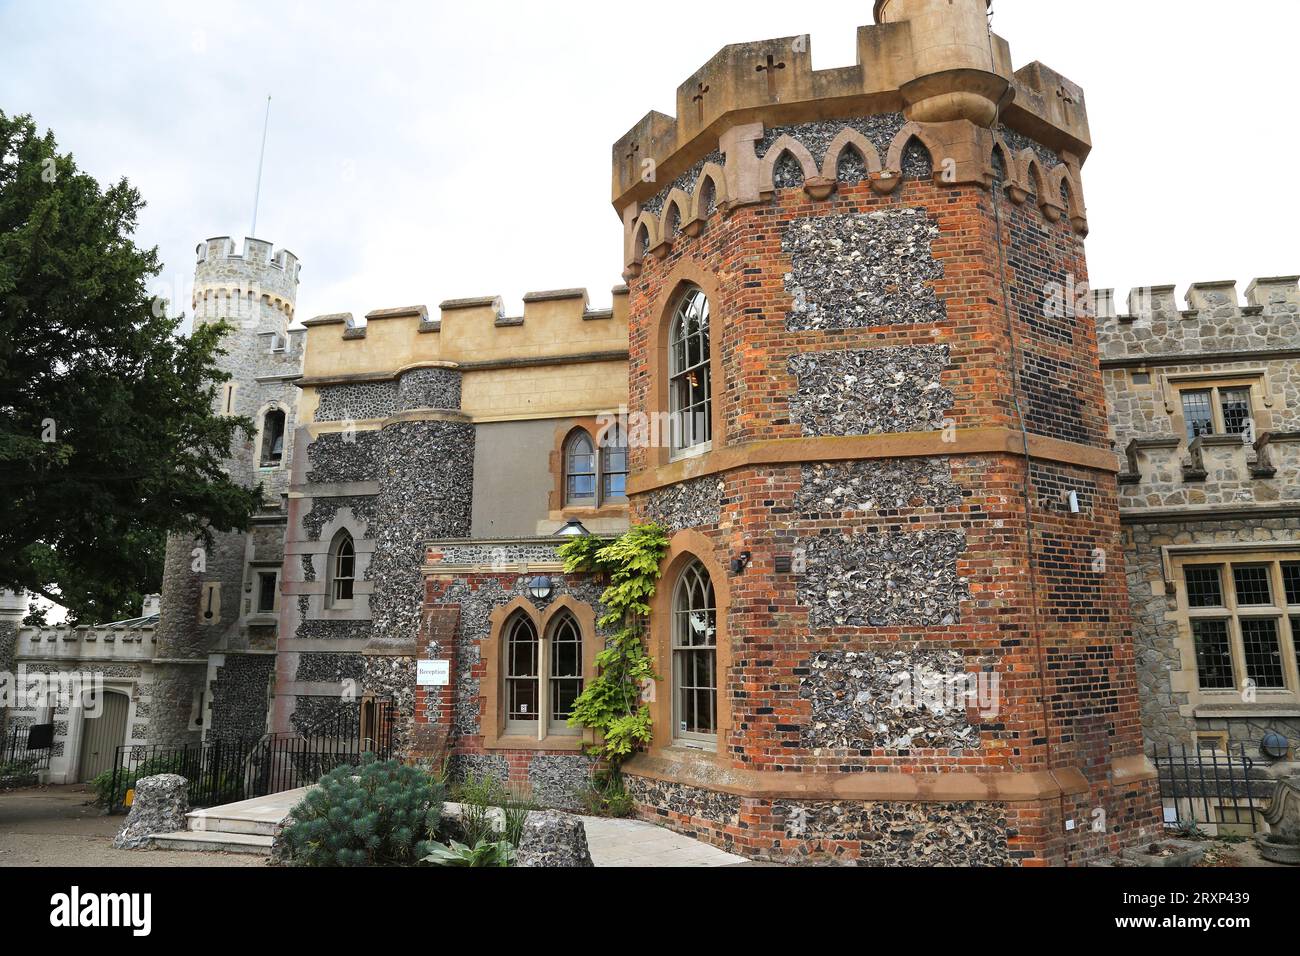 Whitstable Castle & Gardens (formerly Tankerton Towers), Tower Hill, Whitstable, Kent, England, Great Britain, United Kingdom, UK, Europe Stock Photo